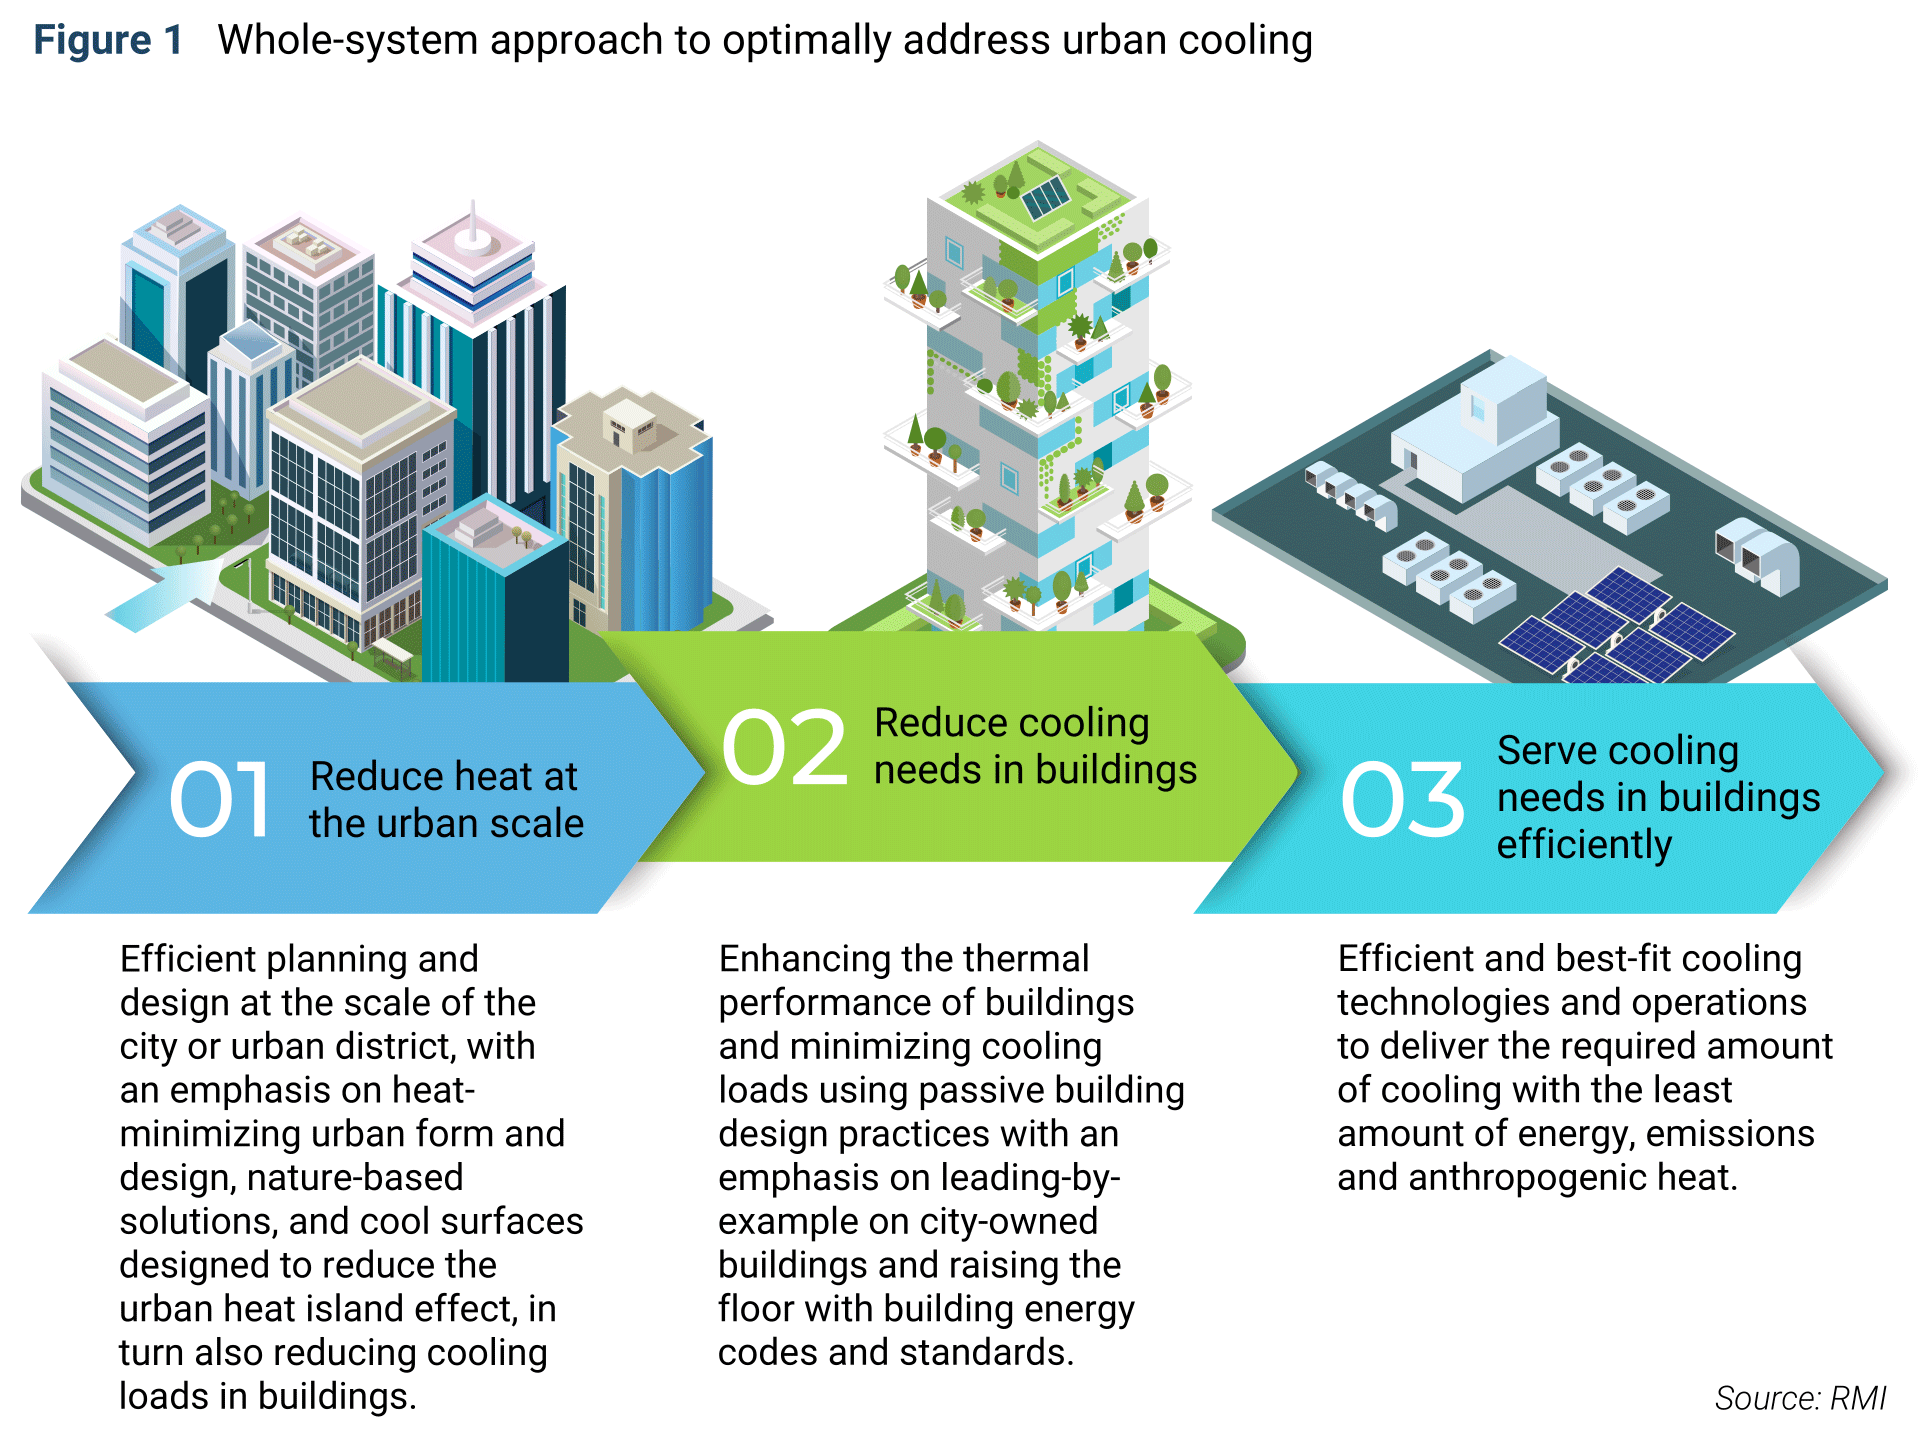 A Whole-Systems Approach Towards Sustainable Urban Cooling